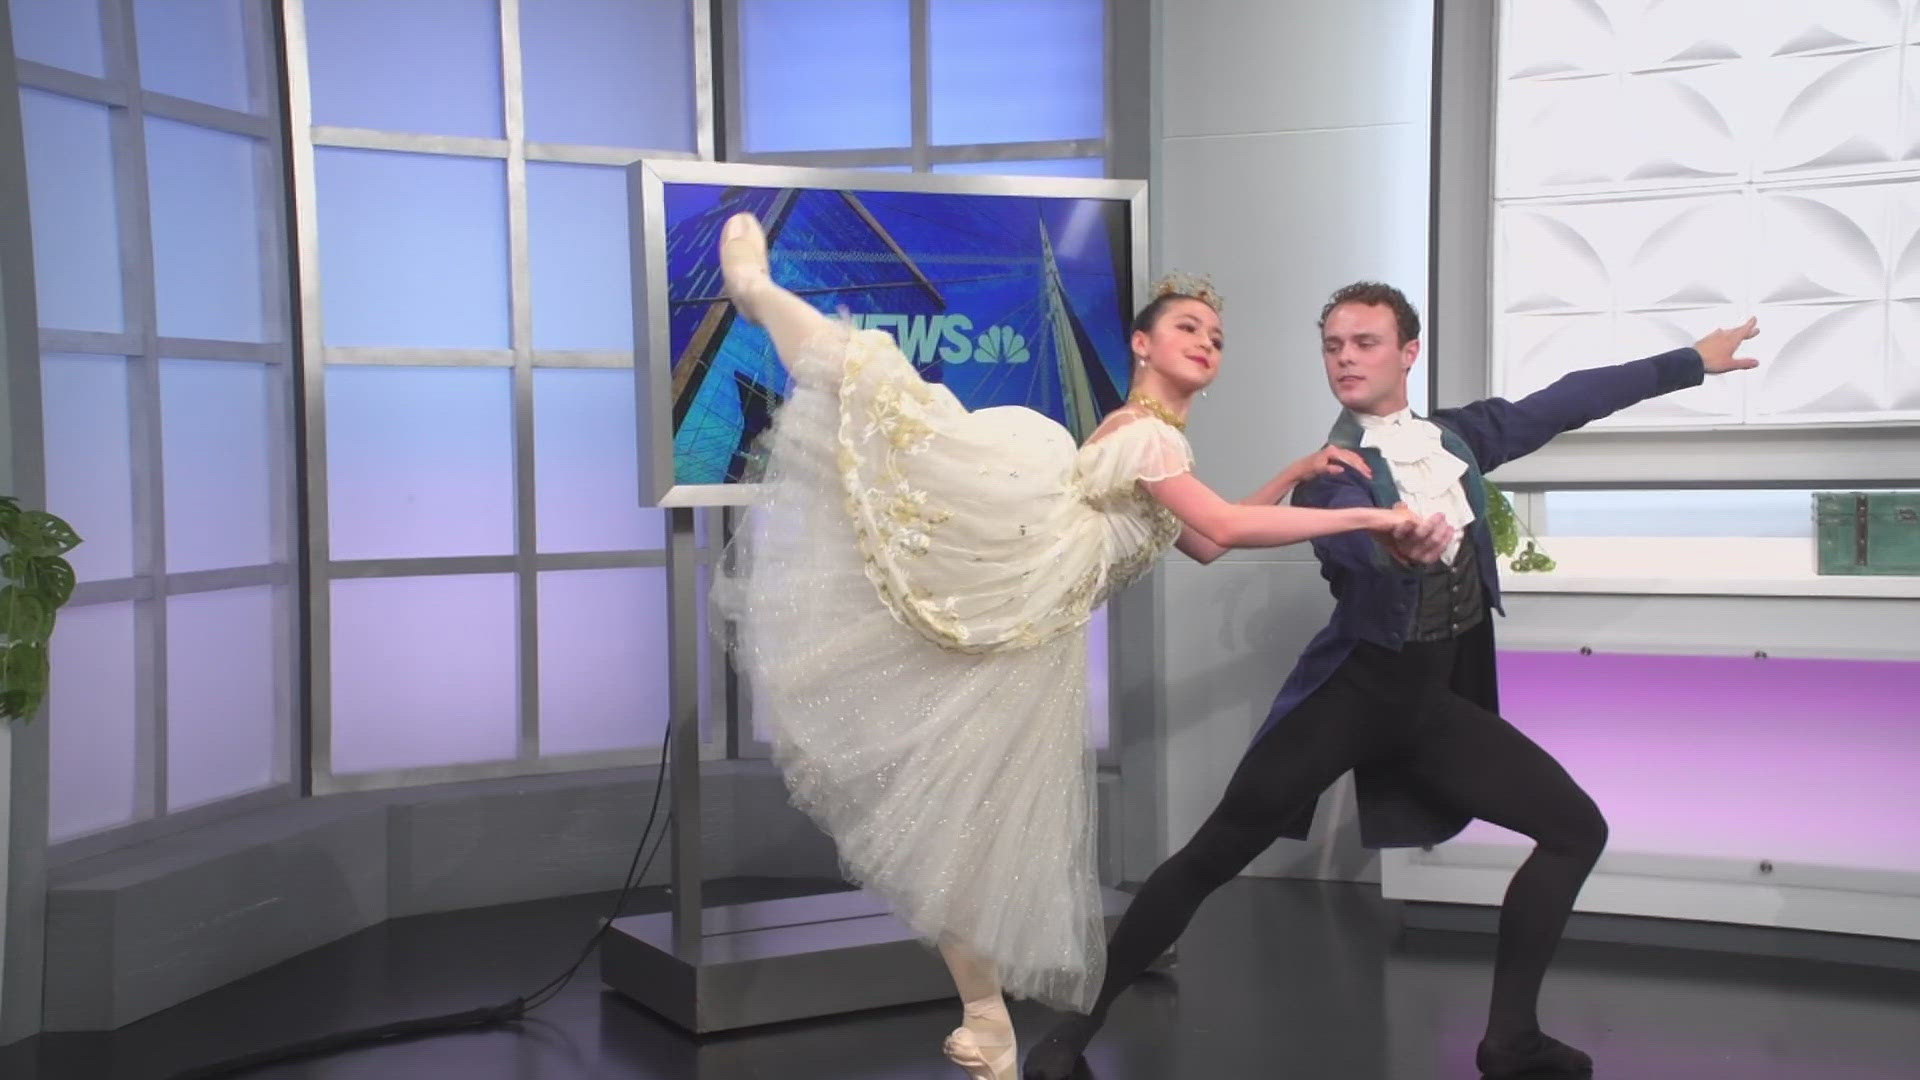 The International Youth Ballet is putting on a performance this weekend where they will be showcasing Cinderella. Here's a sneak peak.